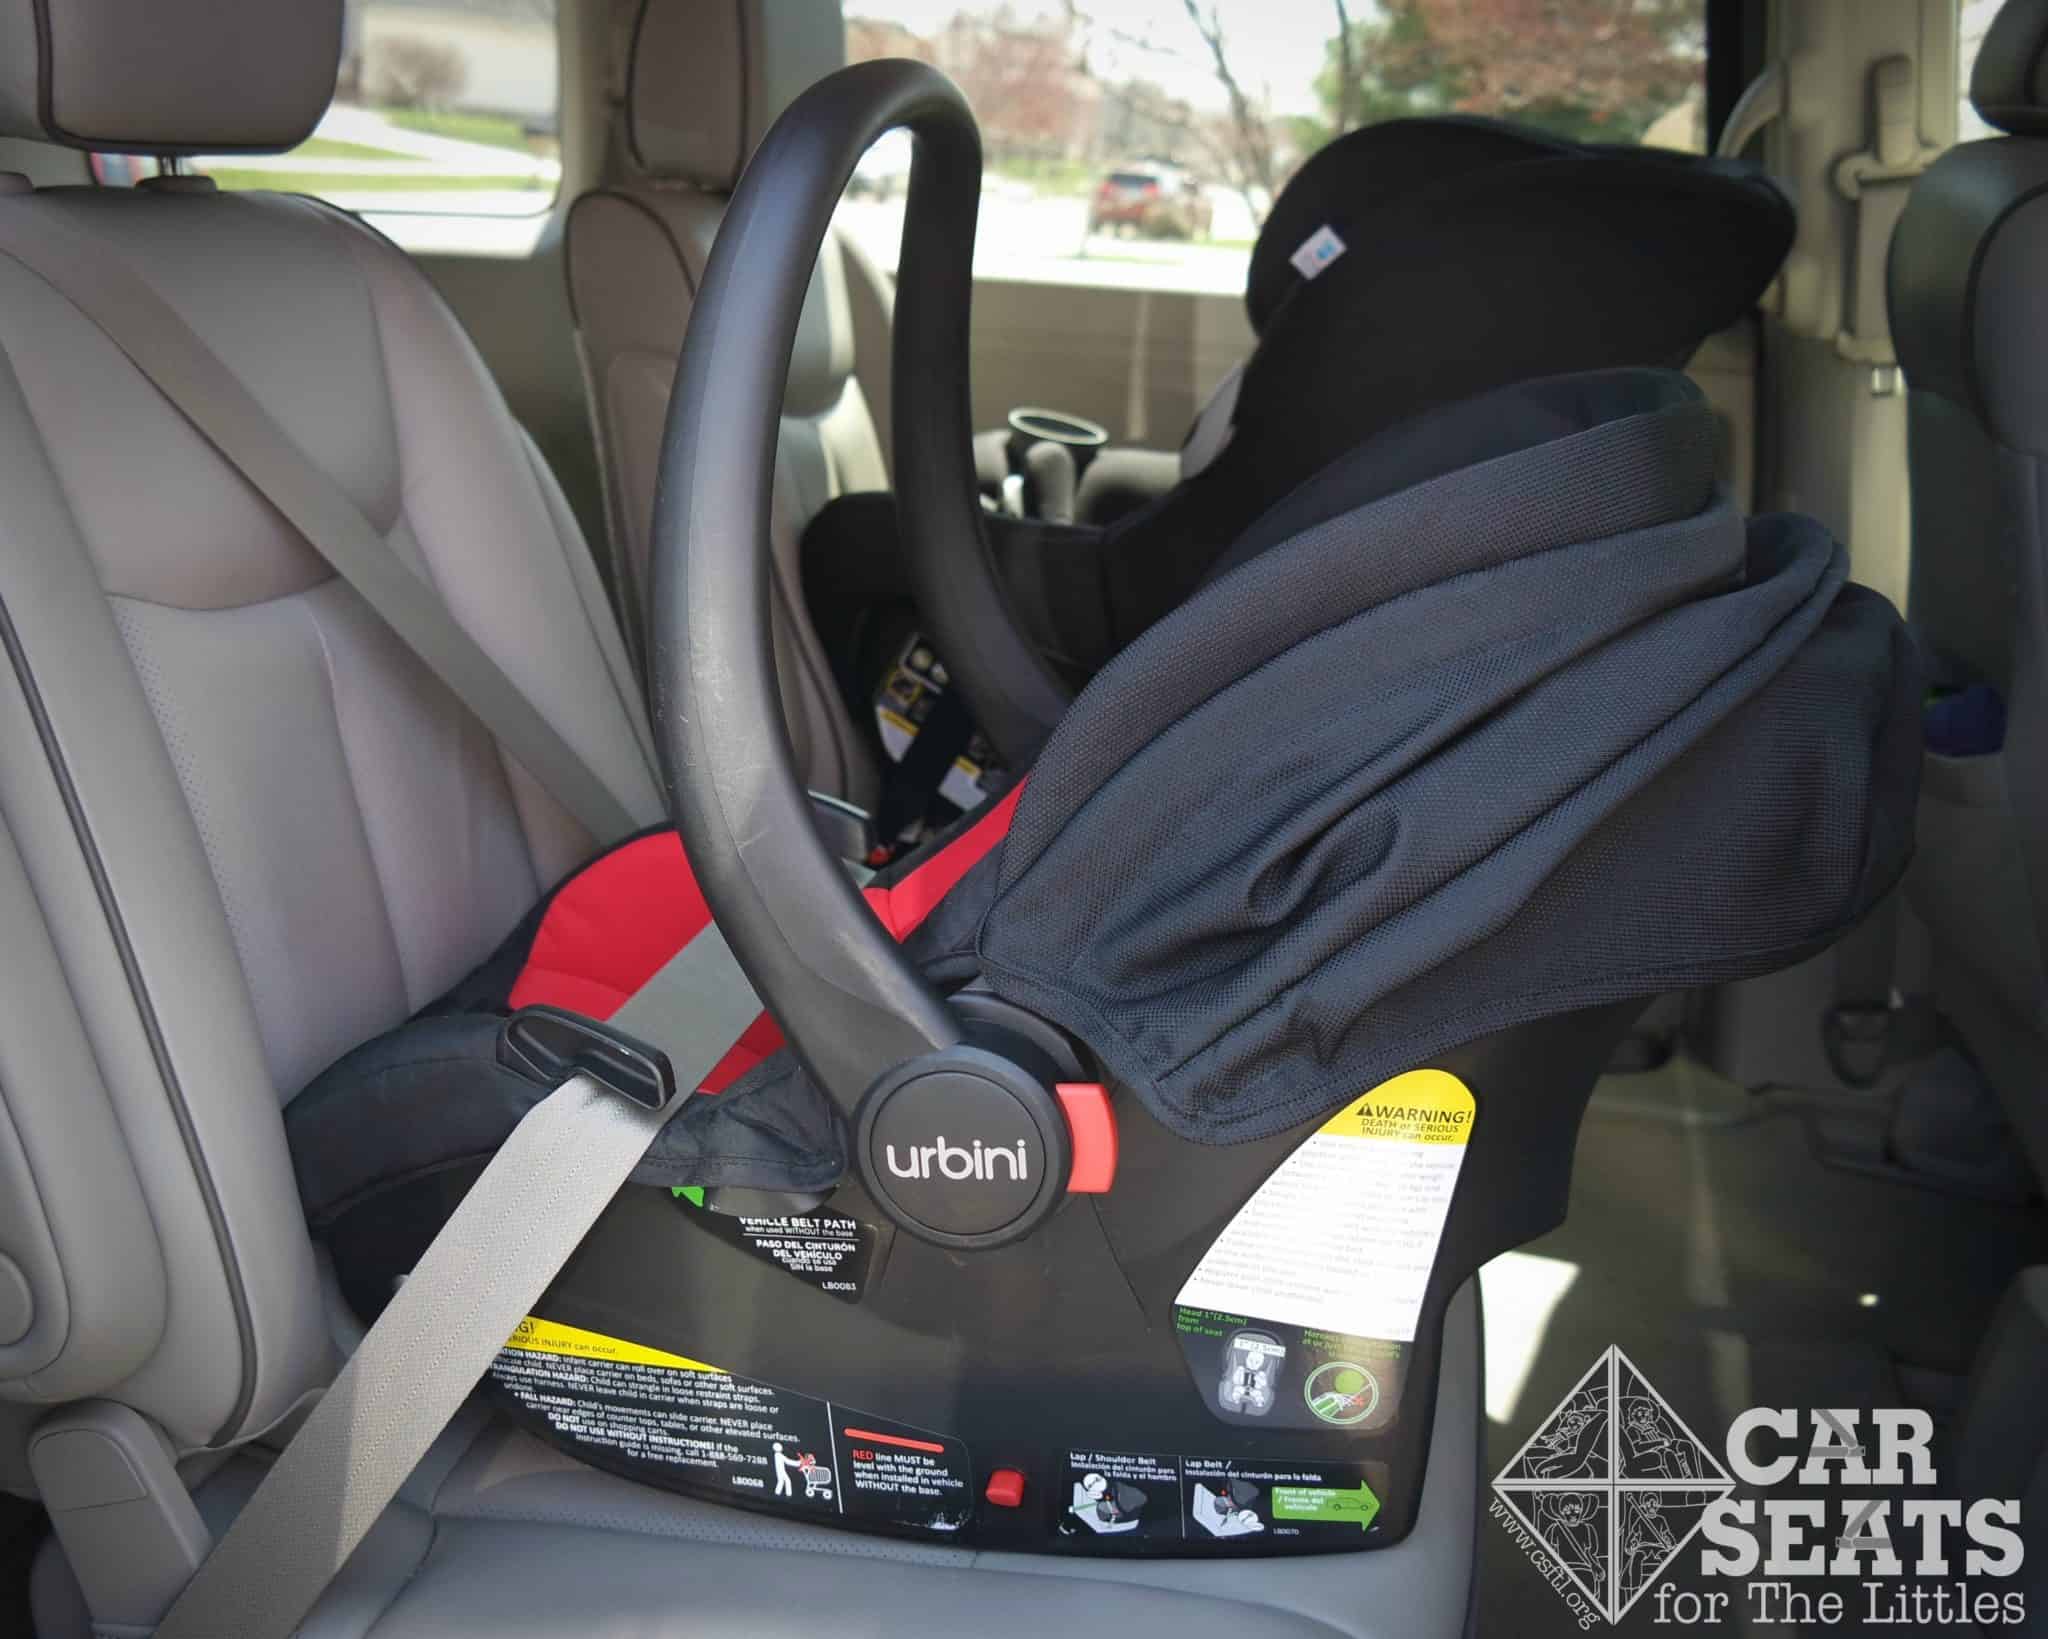 Car Seats For The Littles Installing a Rear Facing Only